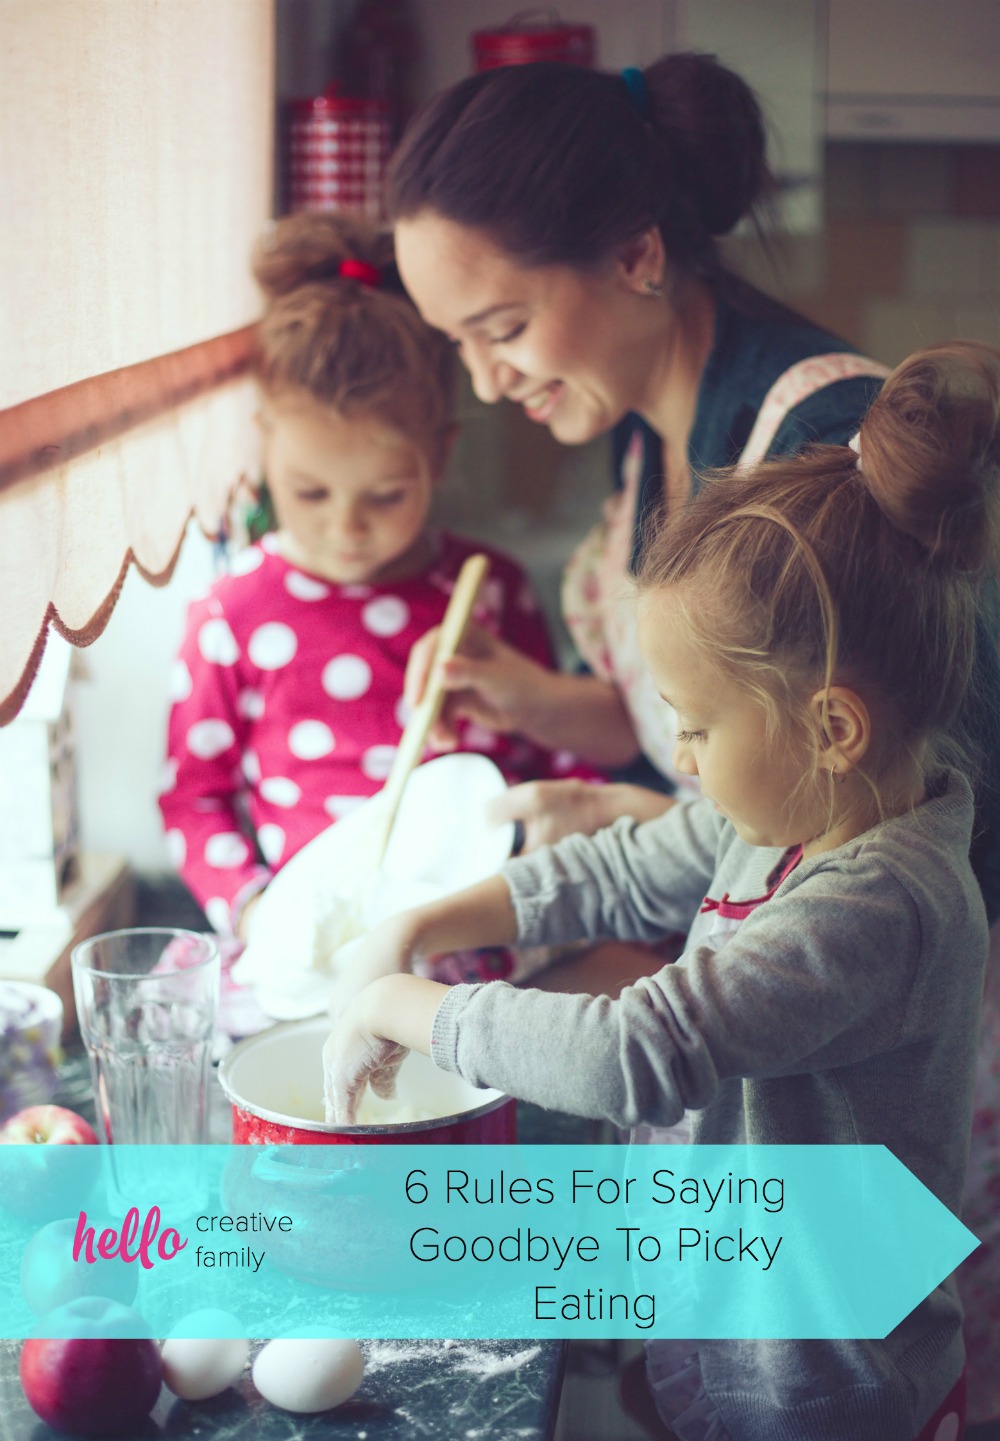 Picky eating can be such a frustrating parenting challenge. Conquer the challenge with these 6 Rules For Saying Goodbye to Picky Eating! Get your kids eating healthy foods that they'll love that will nourish their body! We're not saying it will be easy, but it will definitely be worth it! 